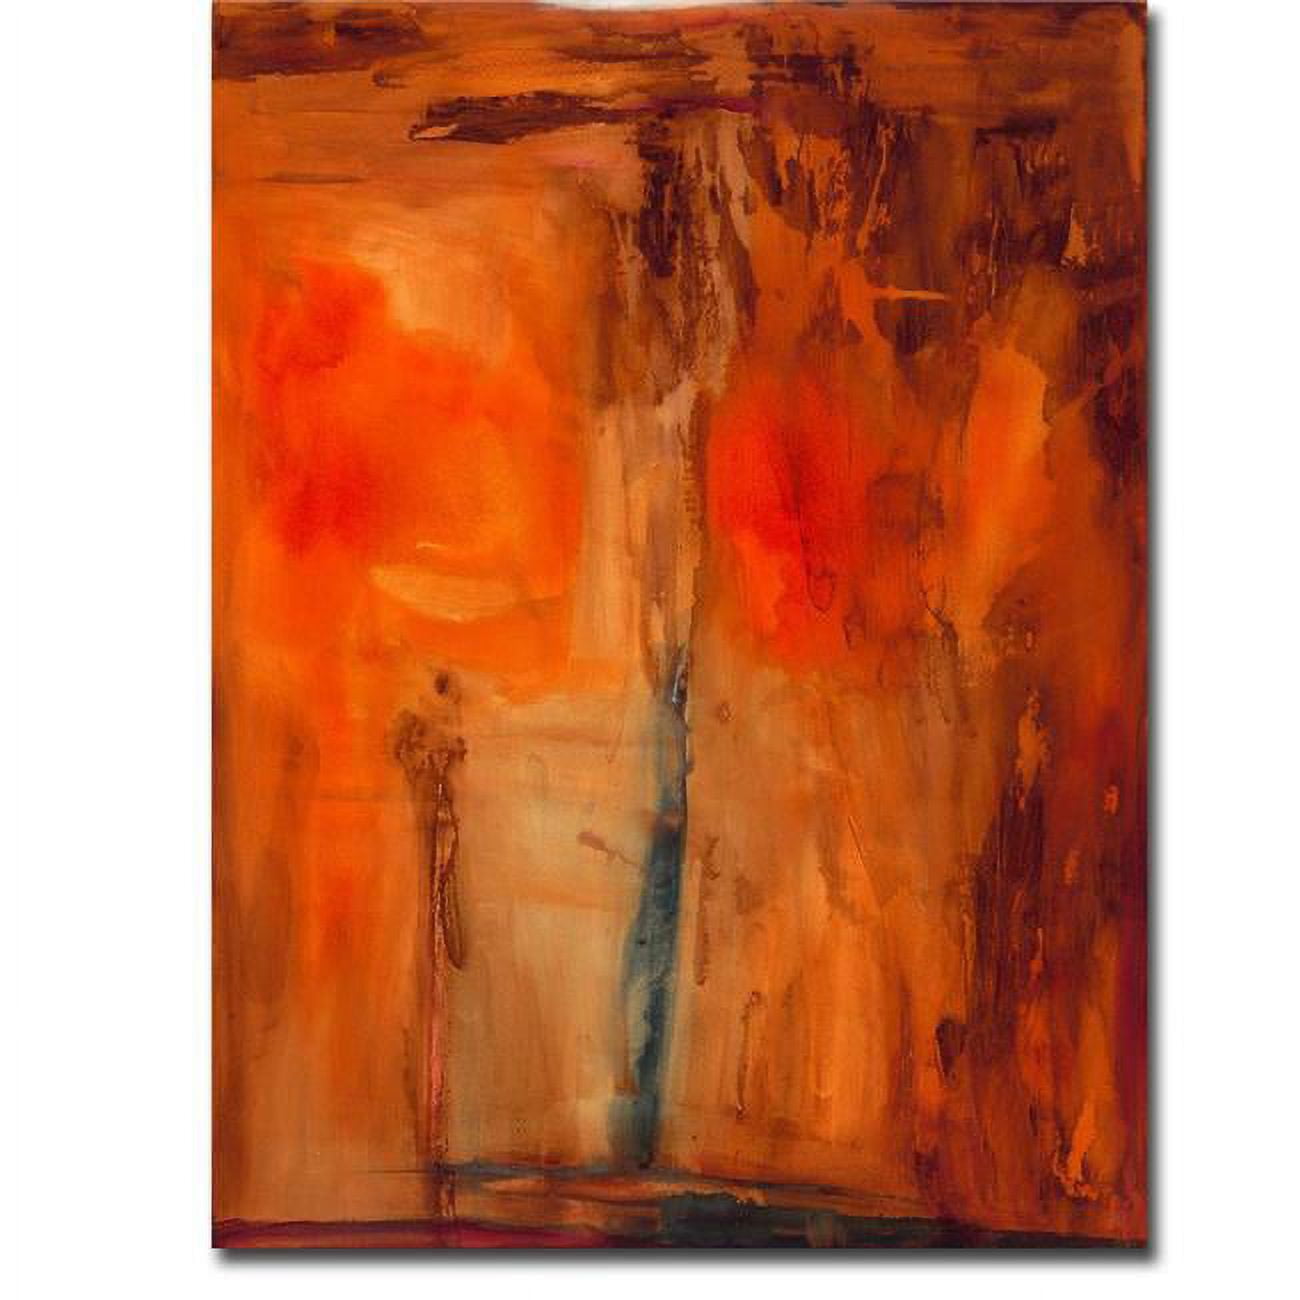 1216757tg Orange Glow By Michelle Oppenheimer Premium Gallery-wrapped Canvas Giclee Art - 16 X 12 In.